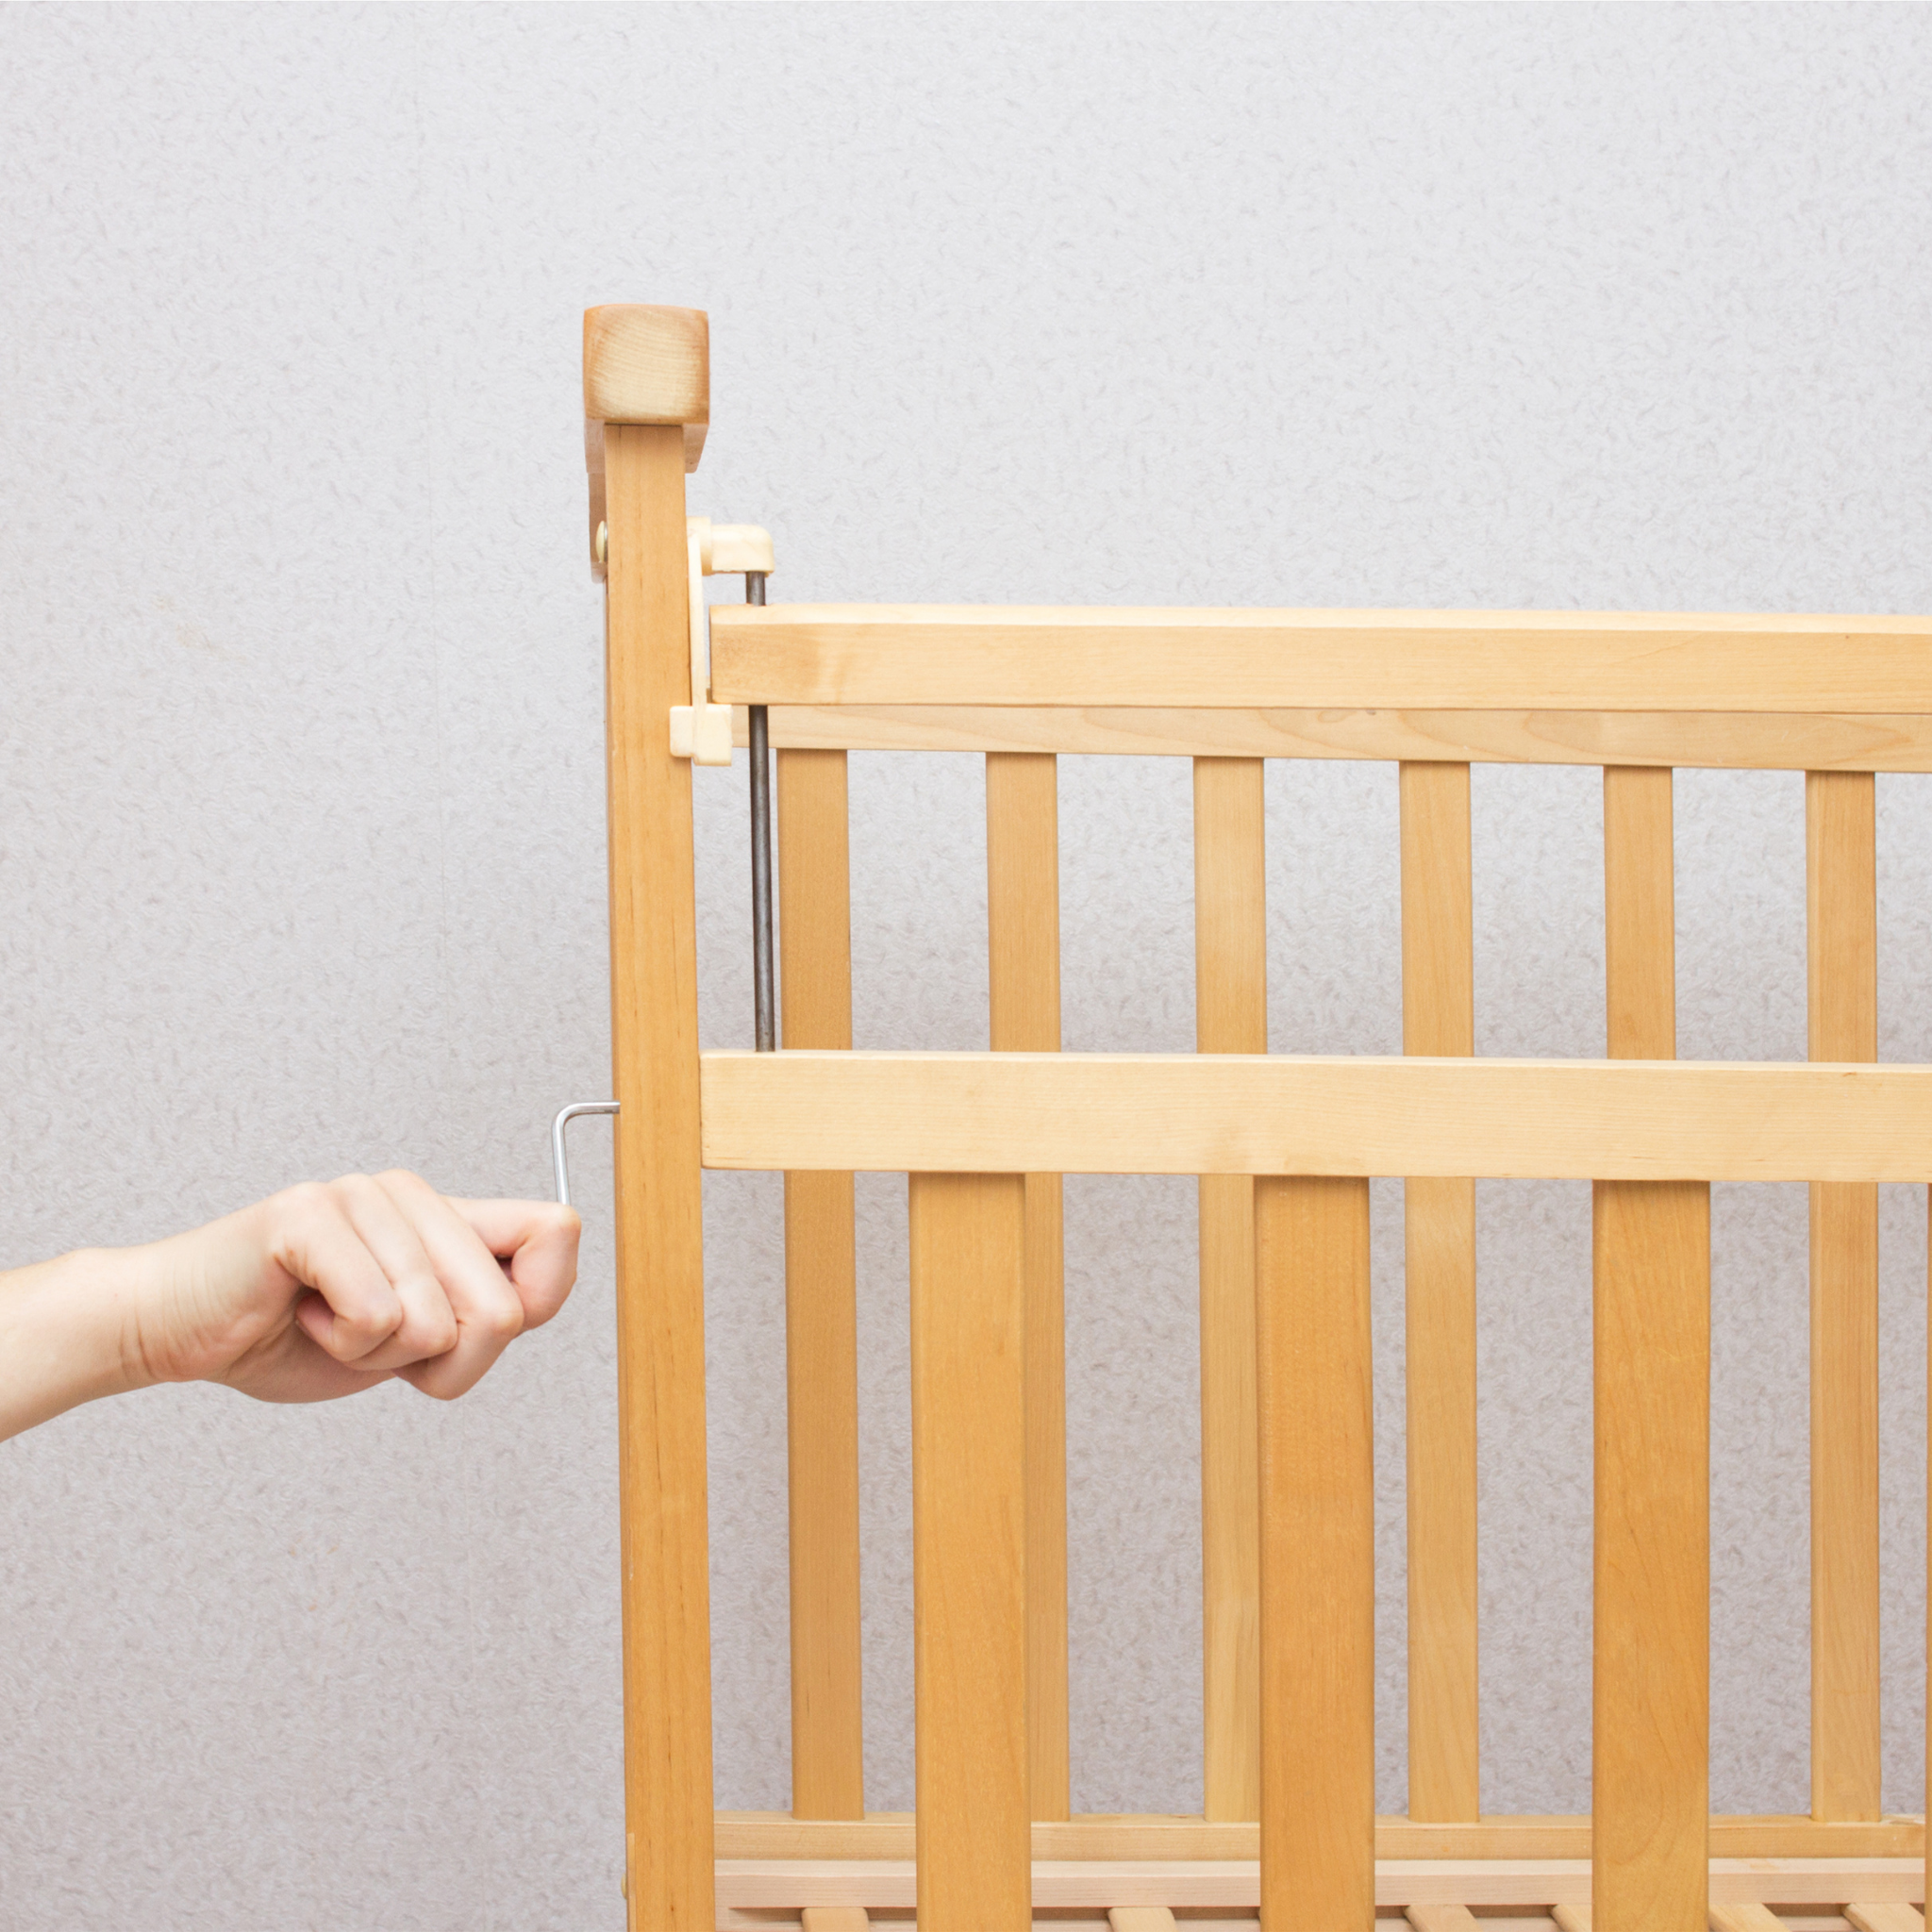 An Essential Guide to Purchasing Second-hand Baby Mattresses